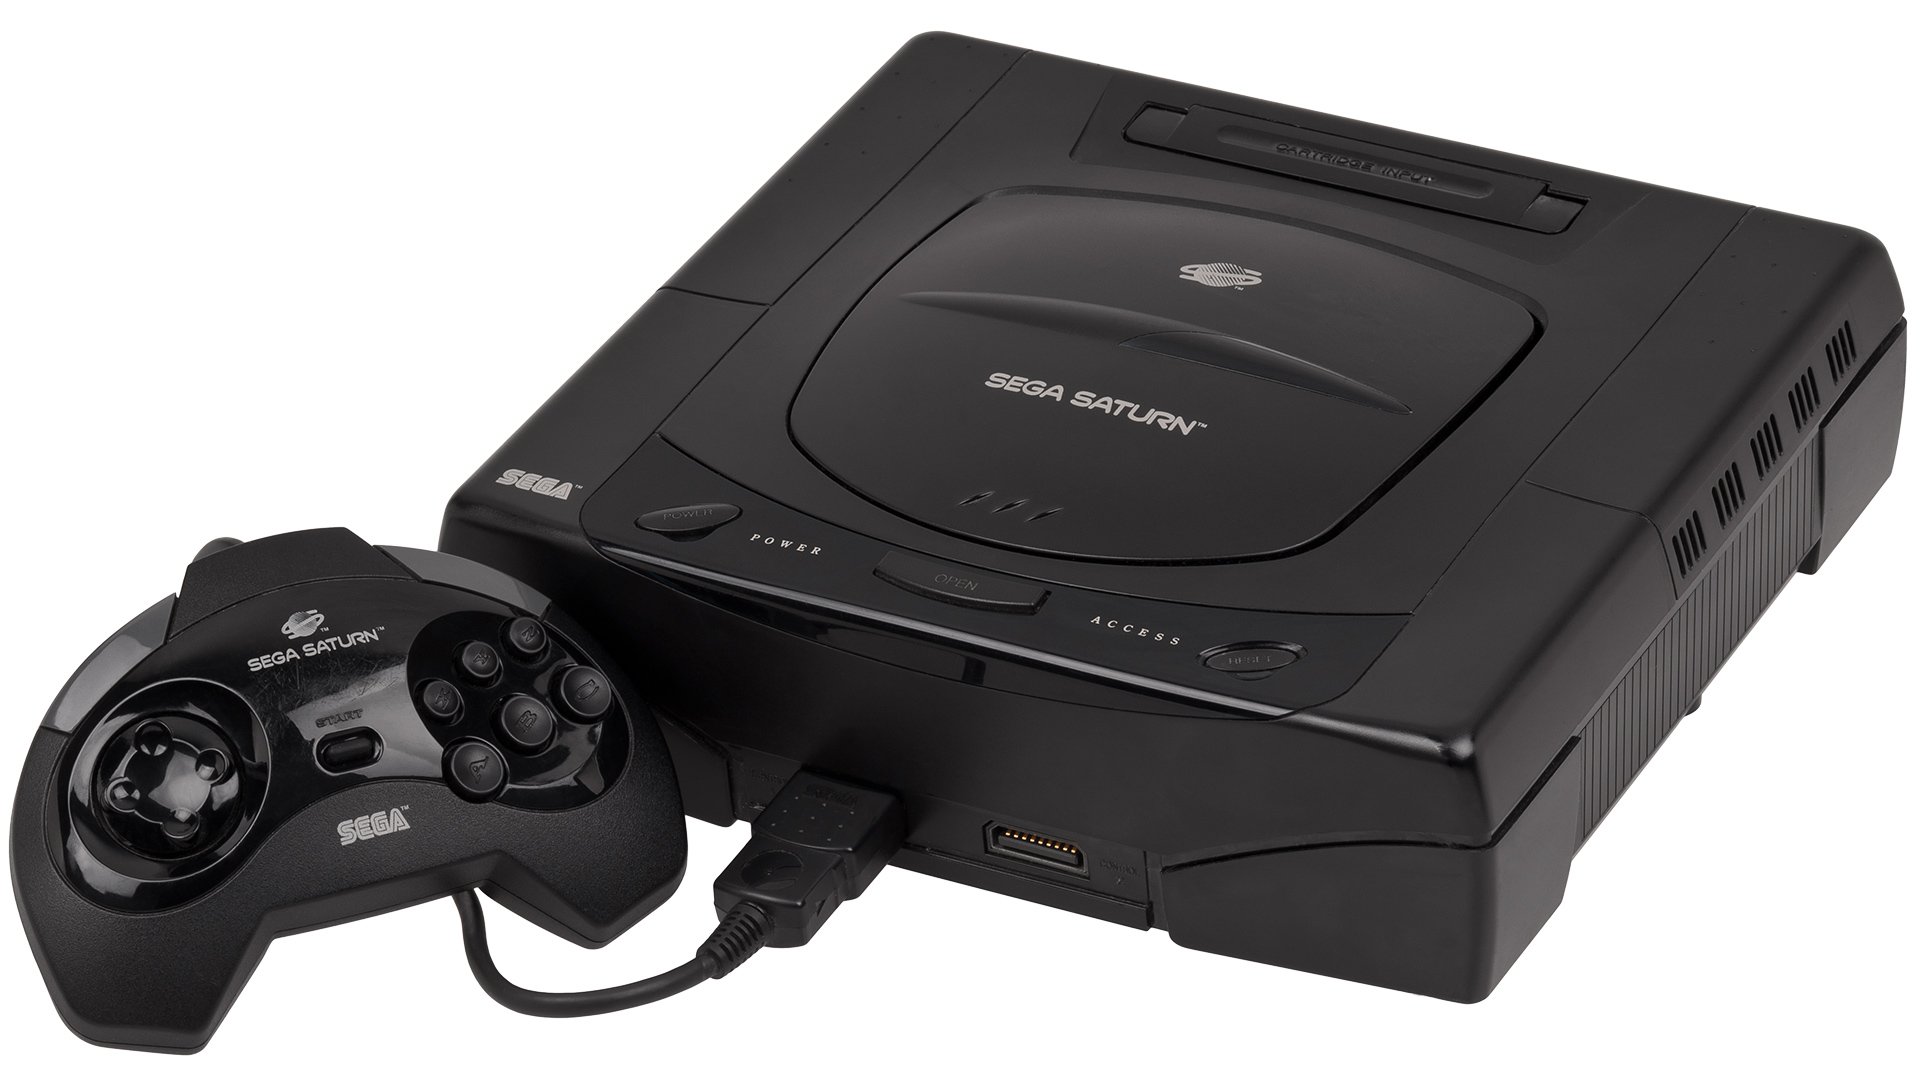 The Sega boss says it’s difficult to turn the Sega Saturn into a micro console